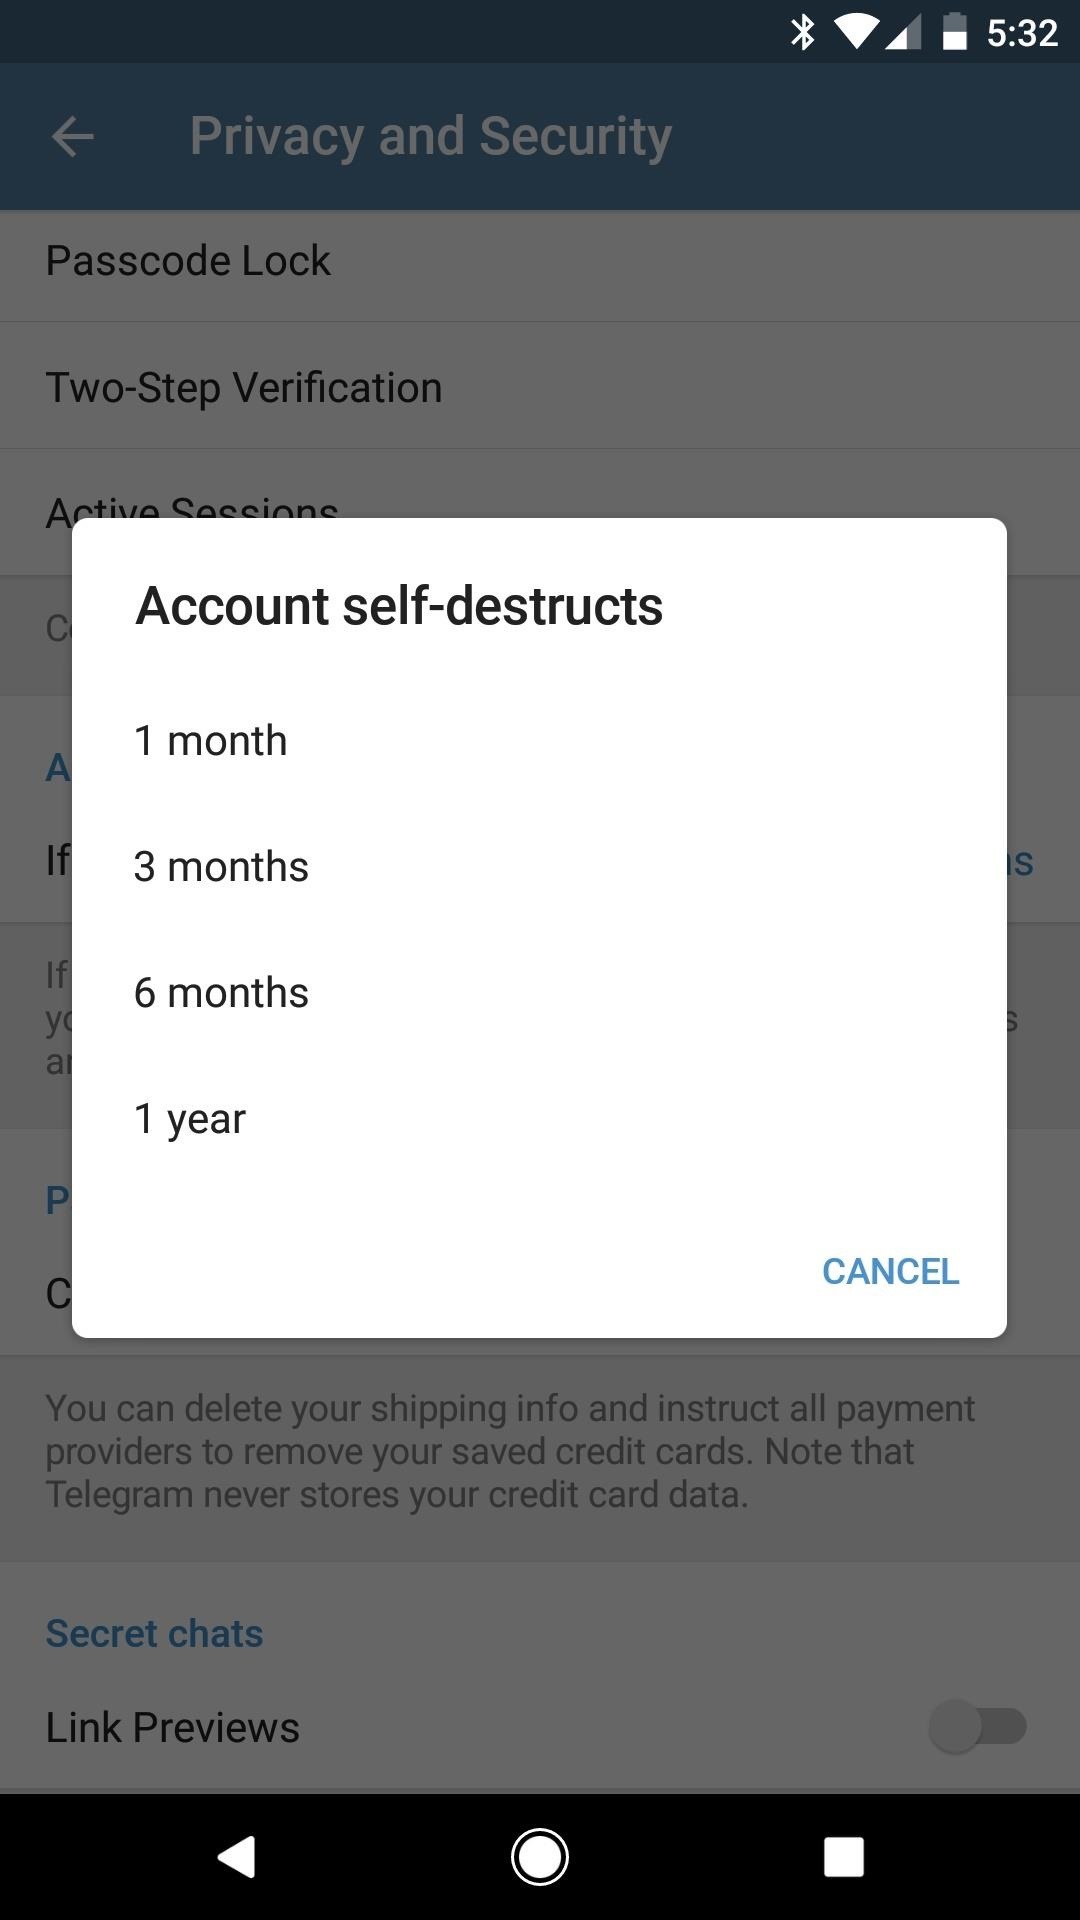 Telegram 101: How to Make Your Entire Account Self-Destruct (Or Just Delete It)